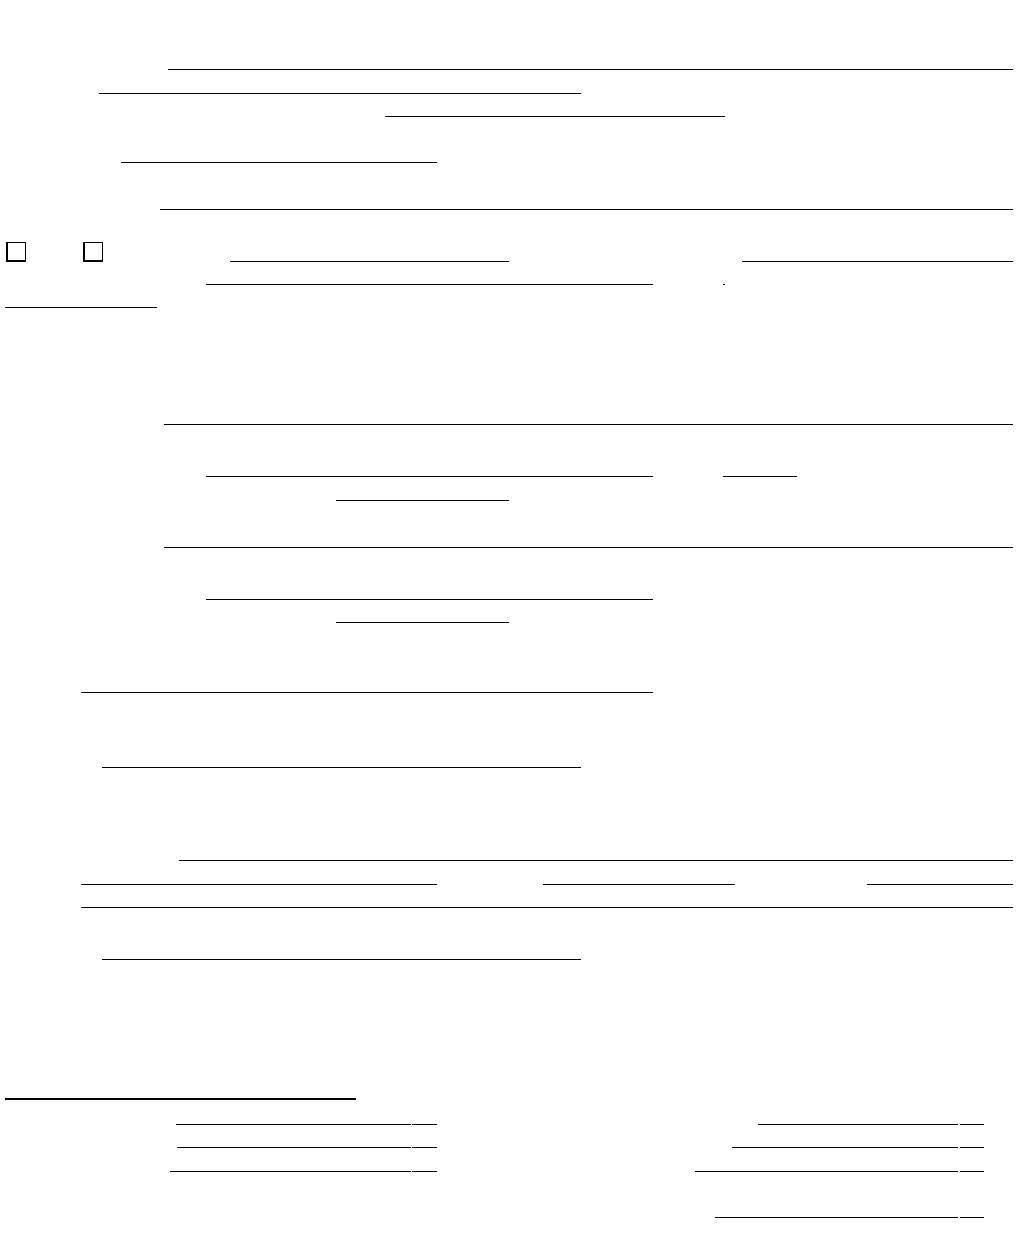 District of Columbia Rental Application Form